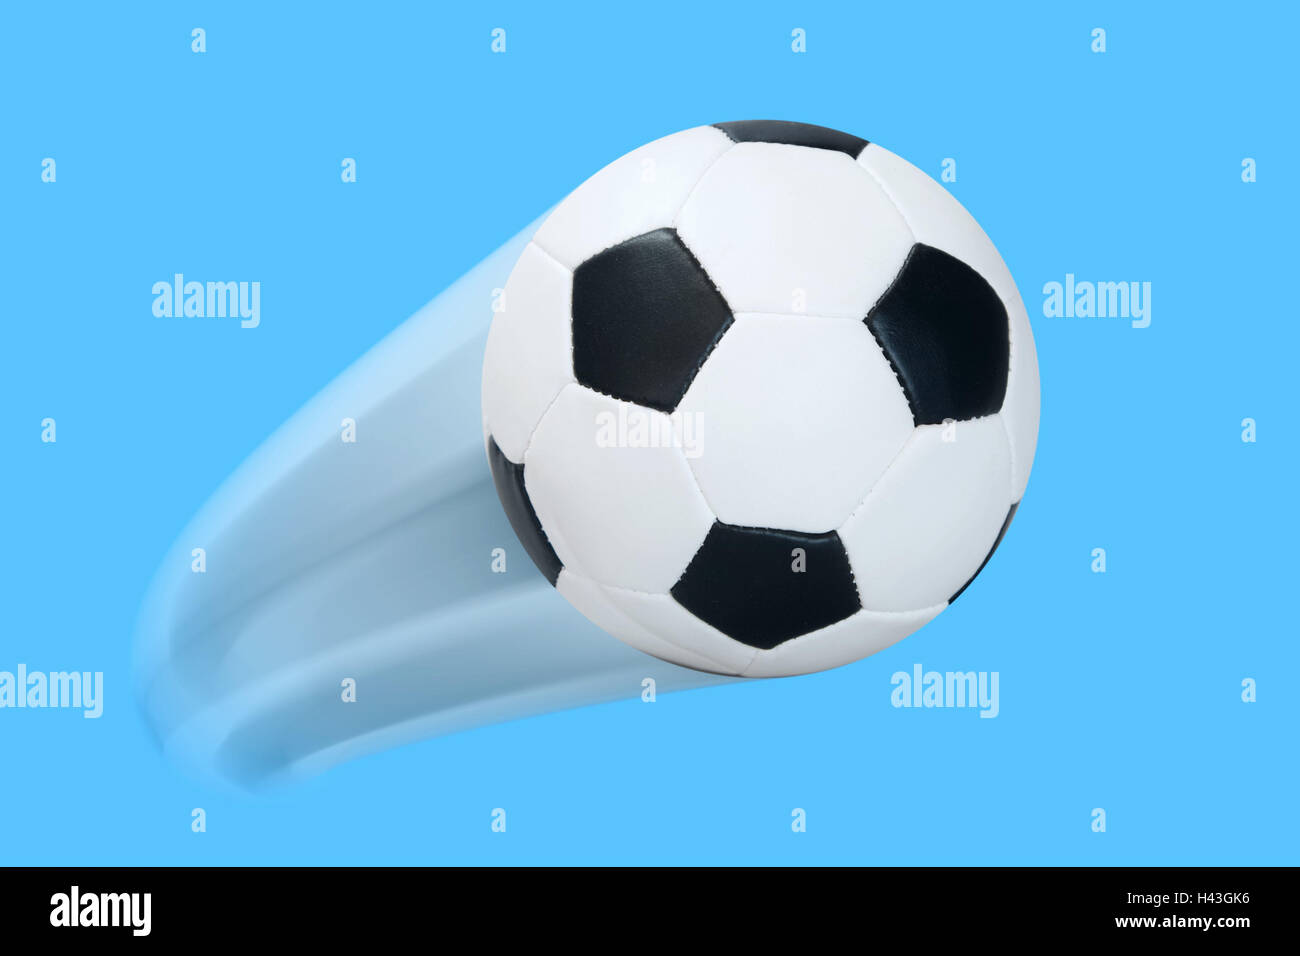 Football, ball, leather ball ball, 'fly', lively, fast, shot, icon, football match, to football matches, sport, hobby, leisure time, team sport, product photography, Stock Photo